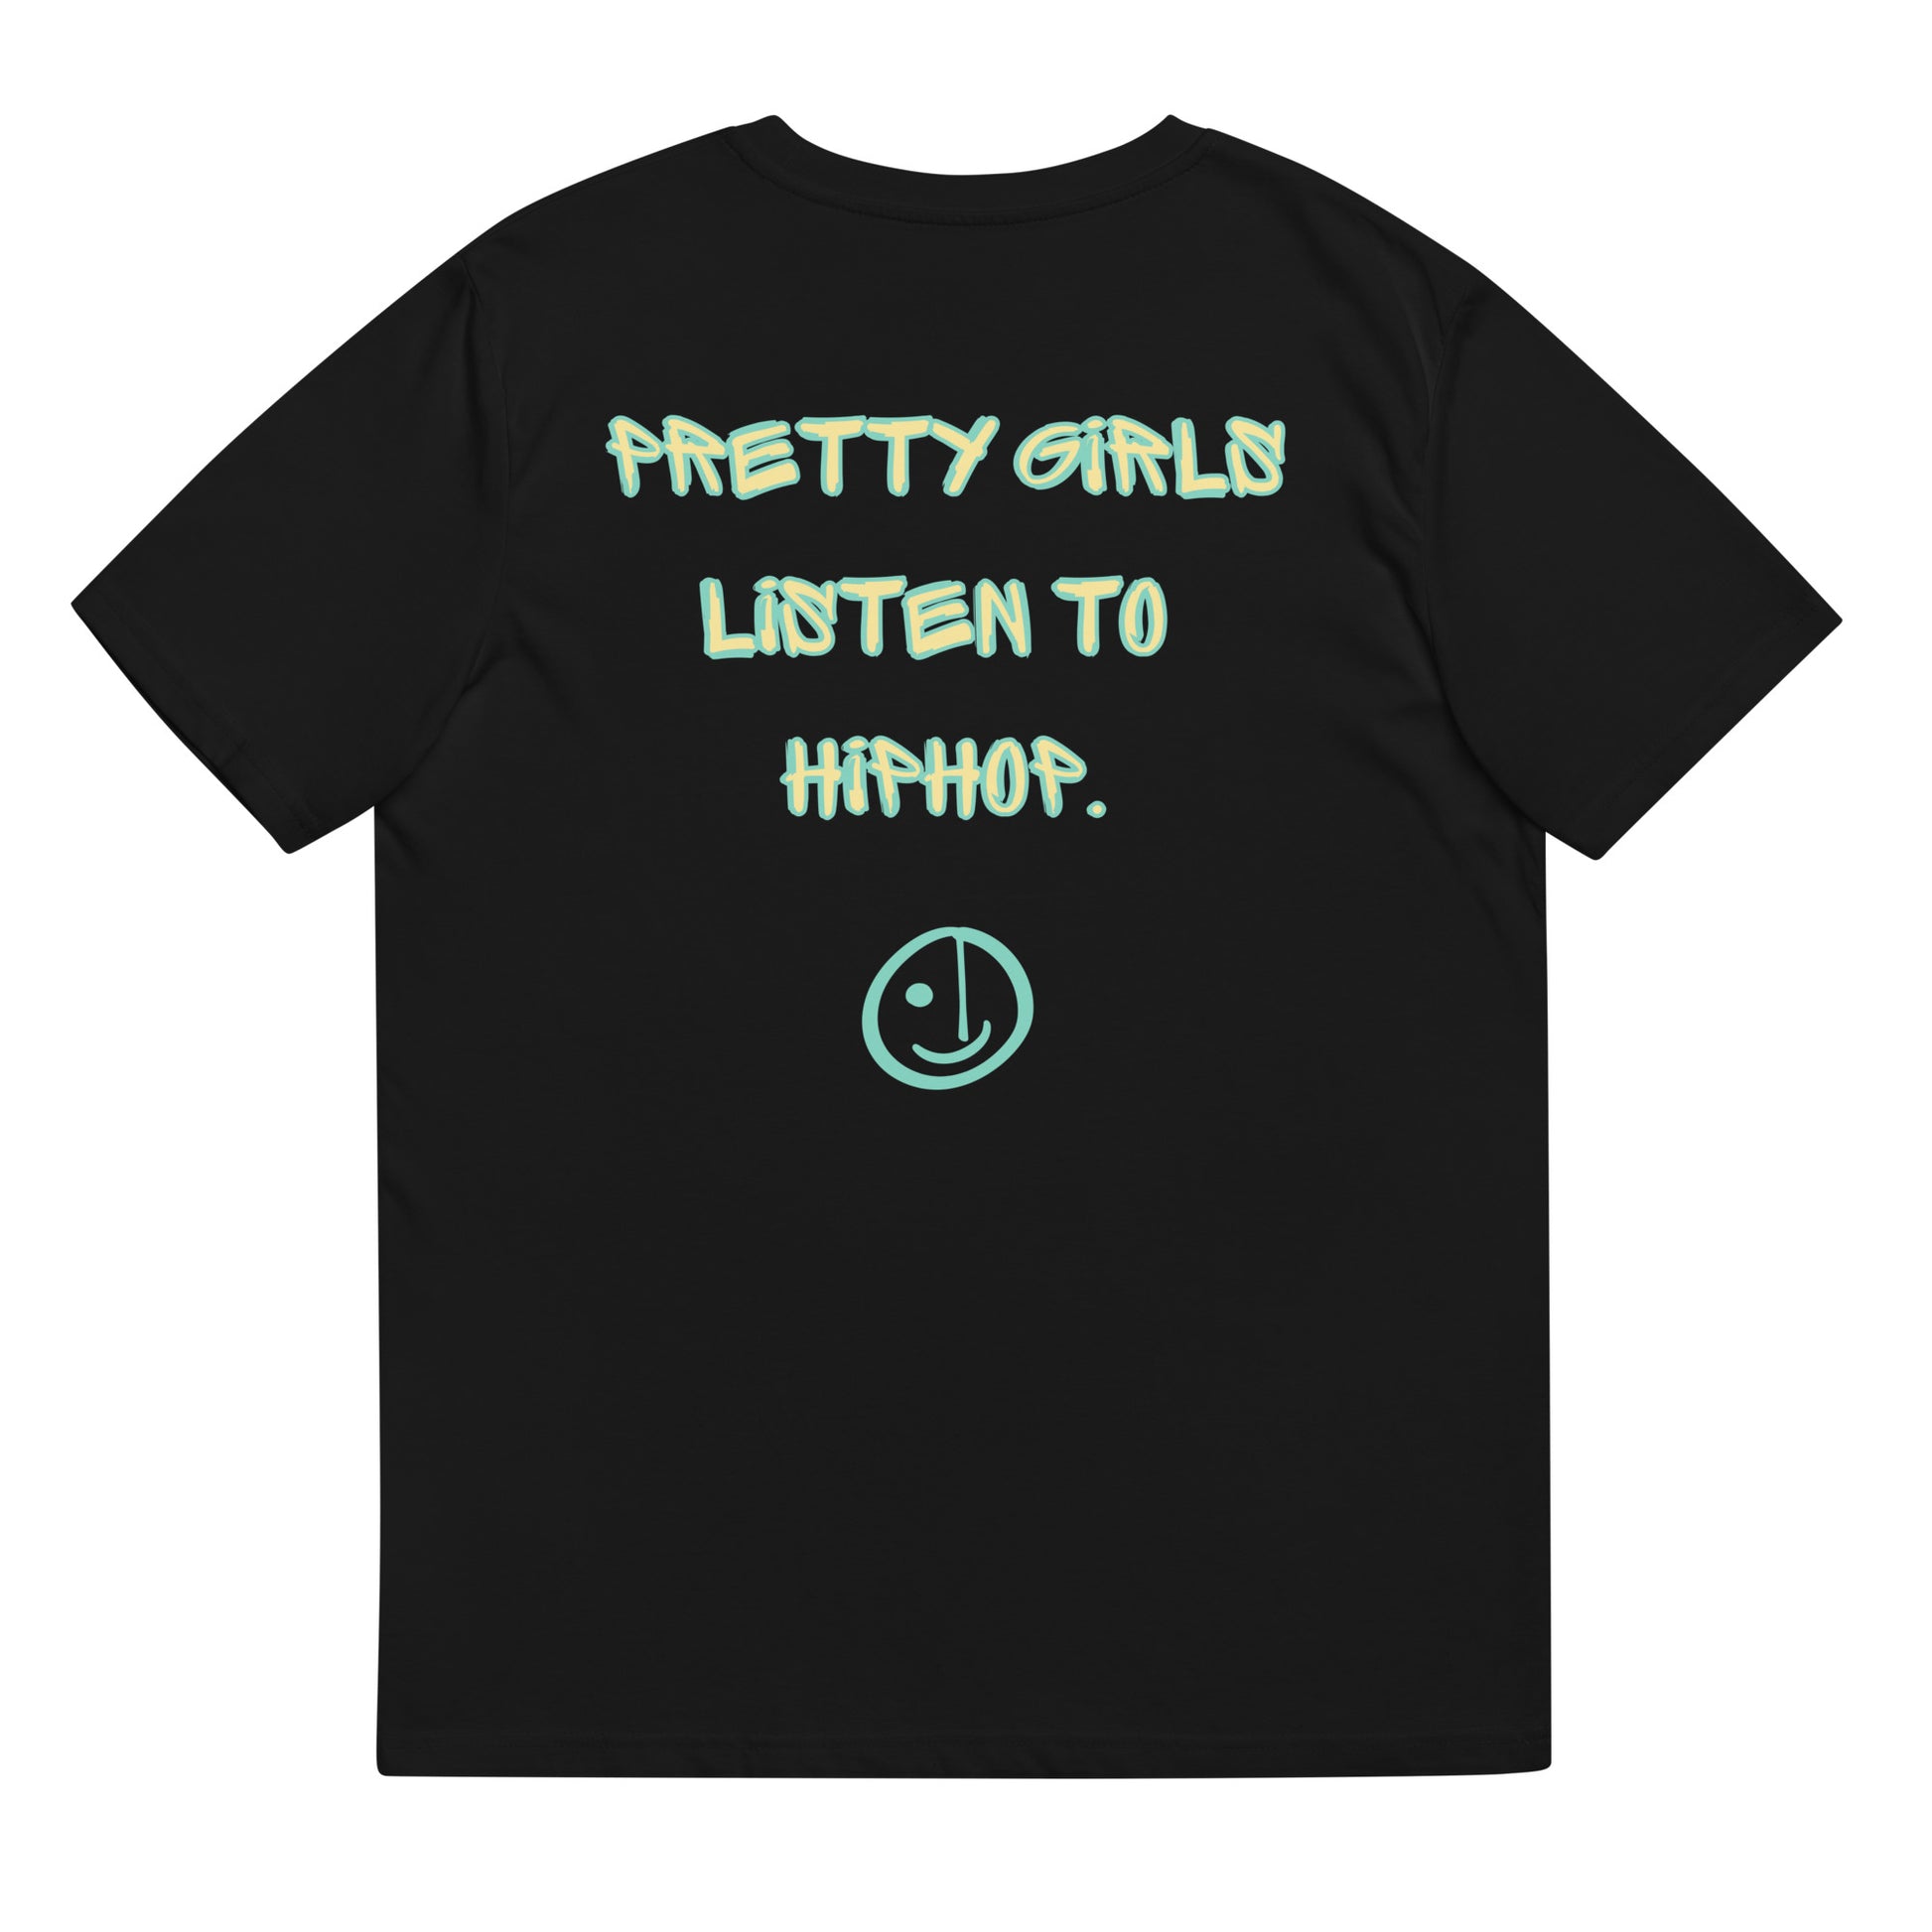 Pretty Girls Listen To Hiphop - anime&hiphop